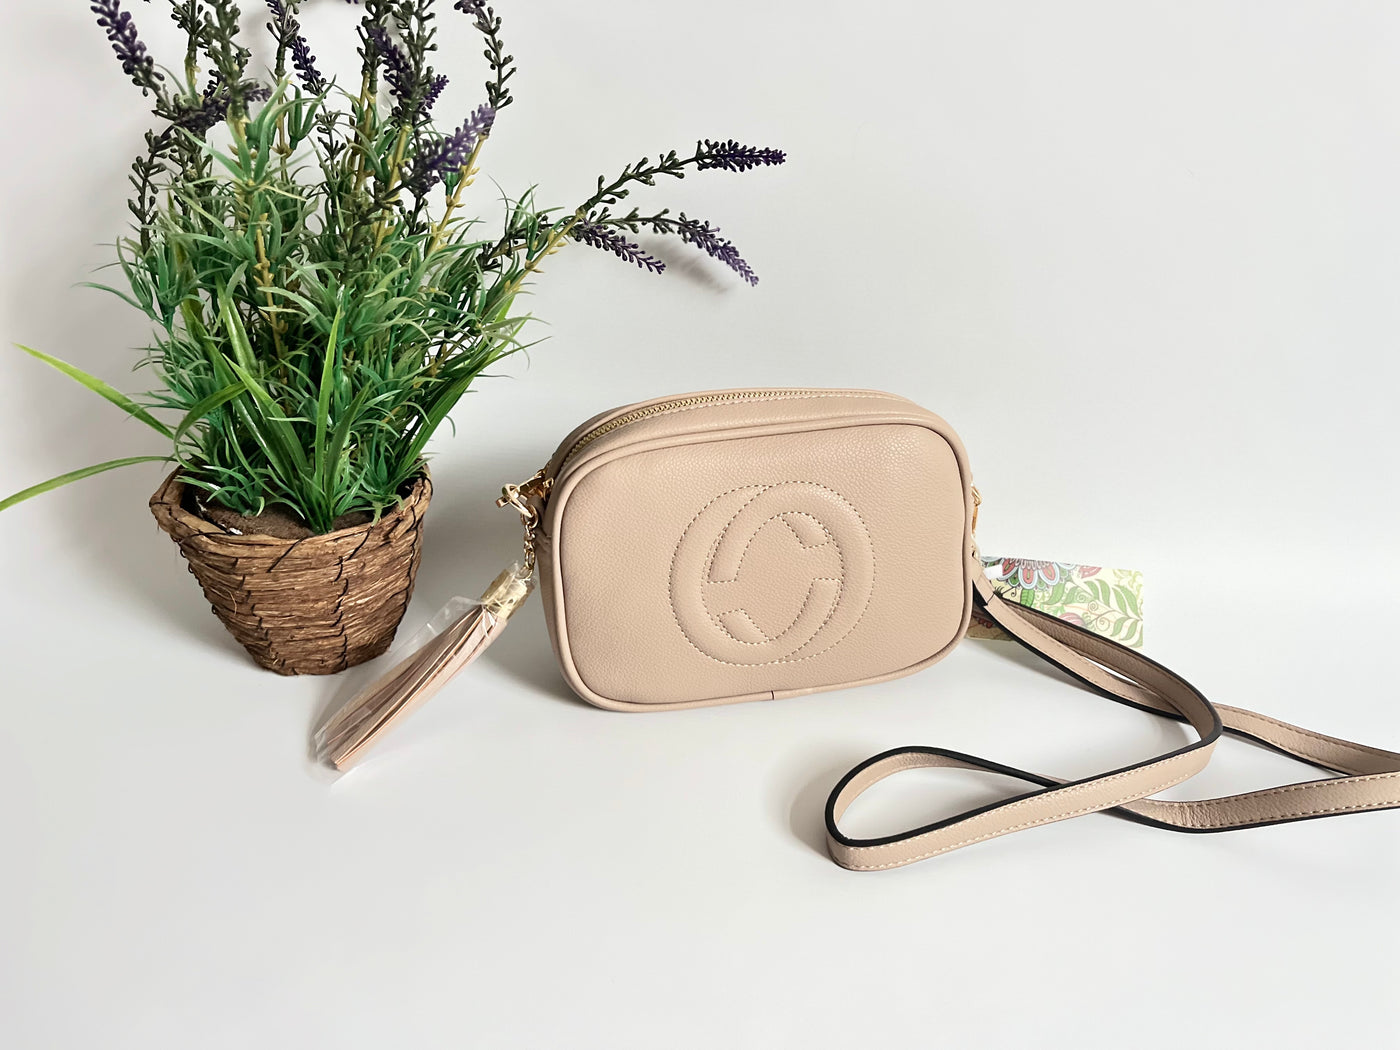 Nude faux leather crossbody bag